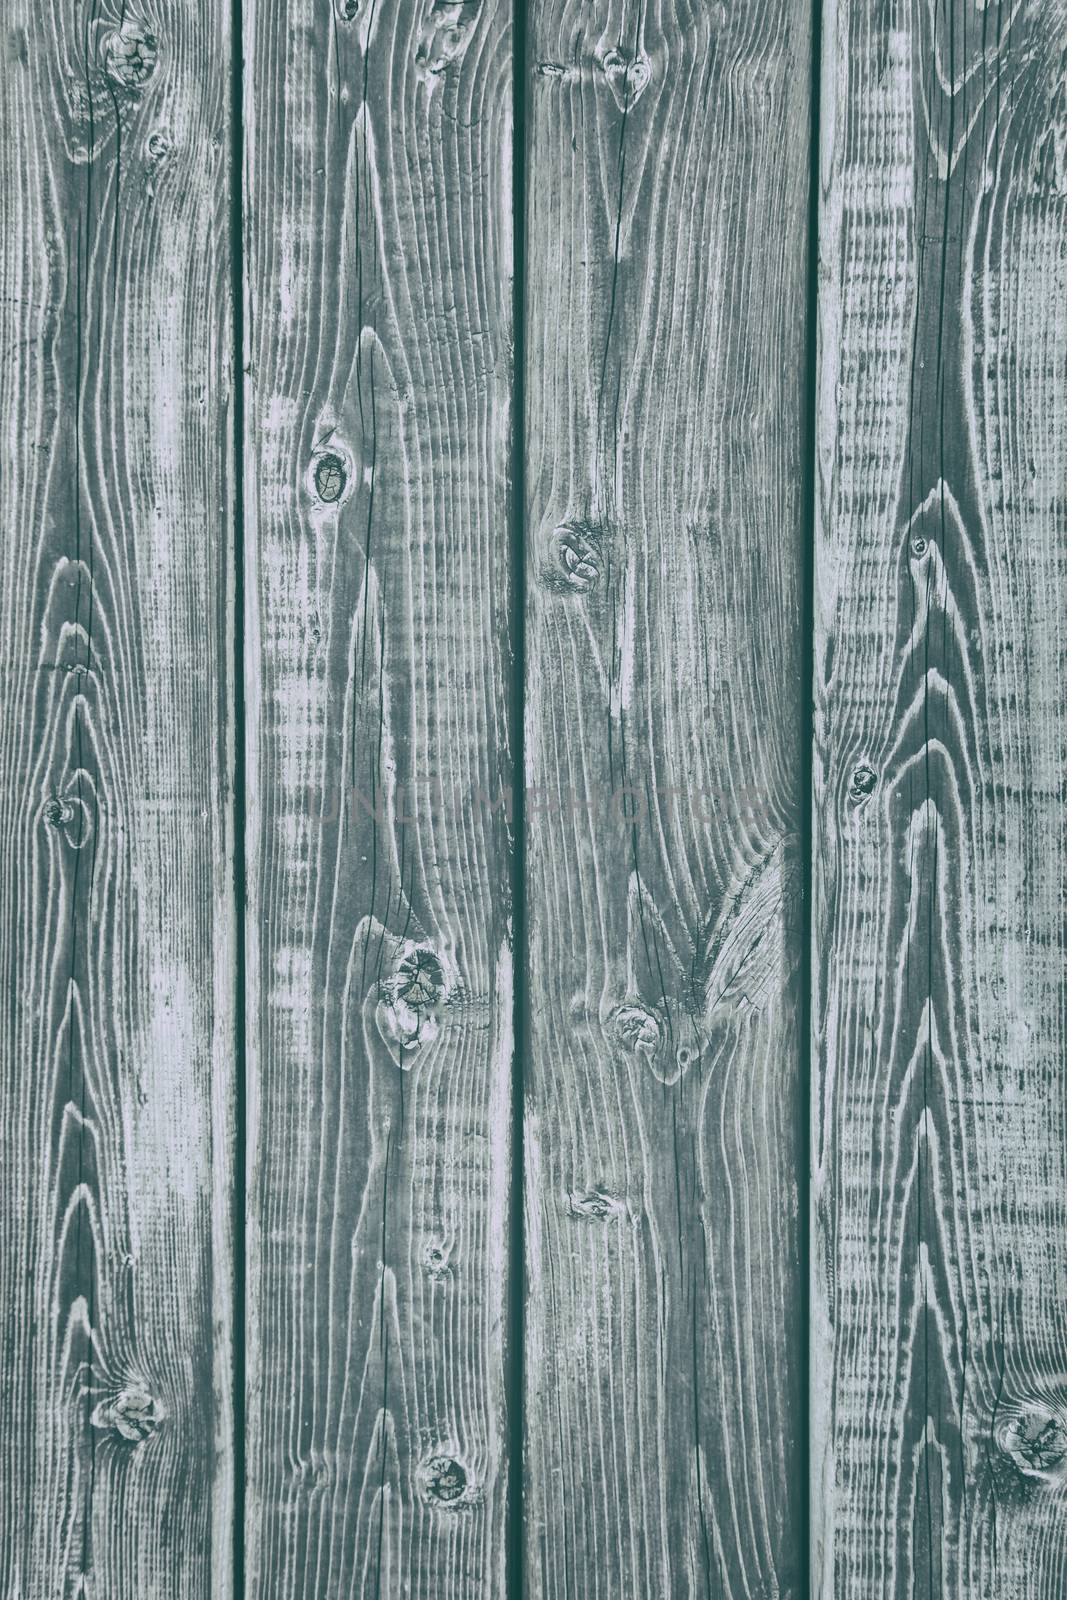 Wooden rustic blanks background by Sandralise